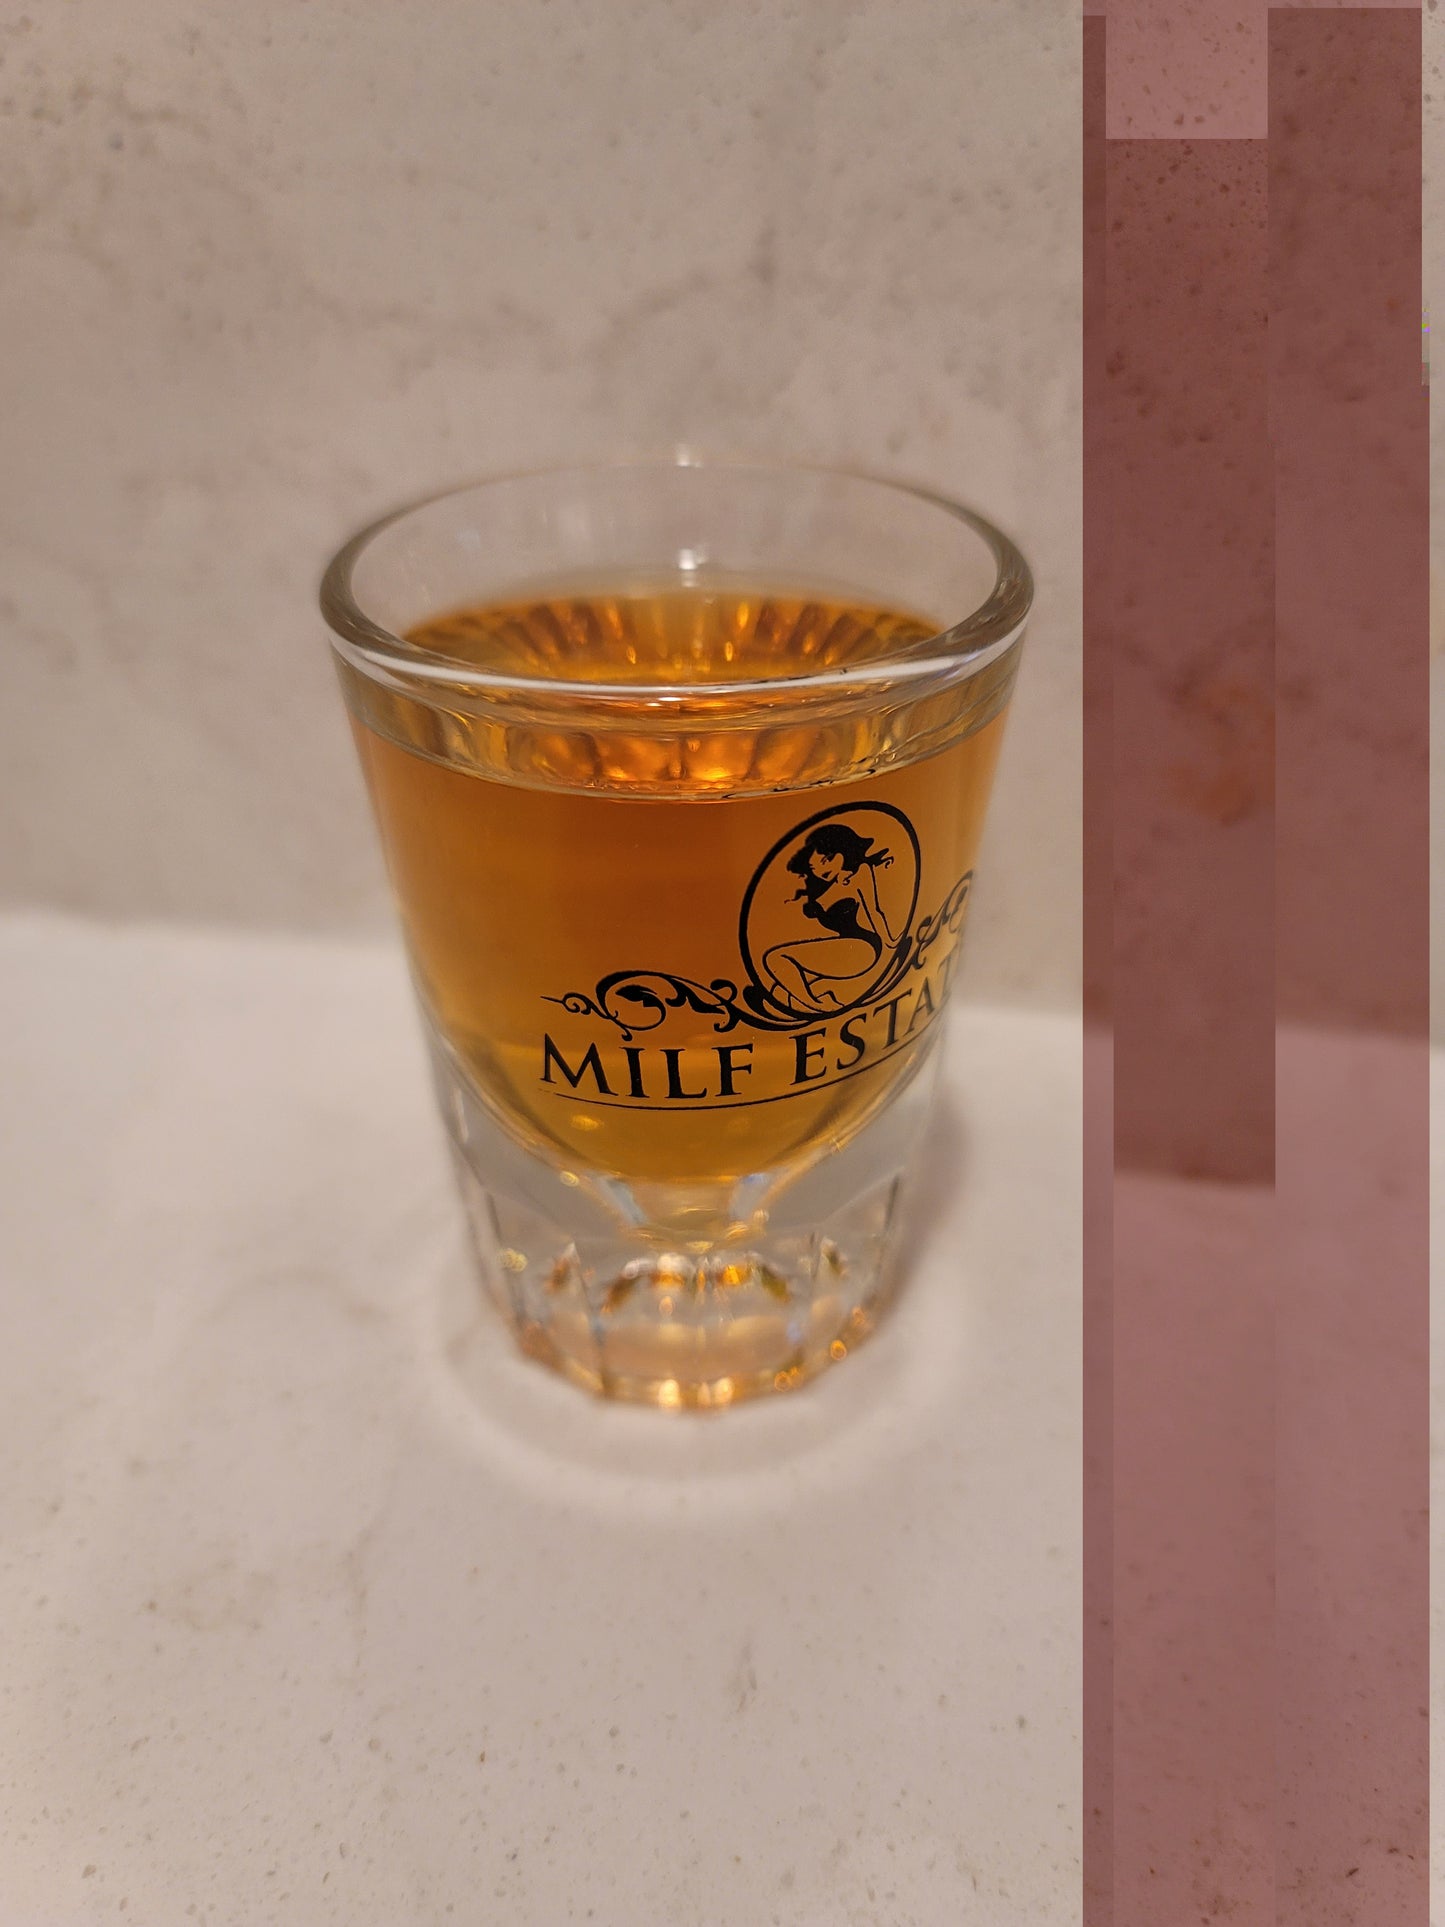 MILF ESTATES Shot Glass  "Limited Quantities- Special Order Now"